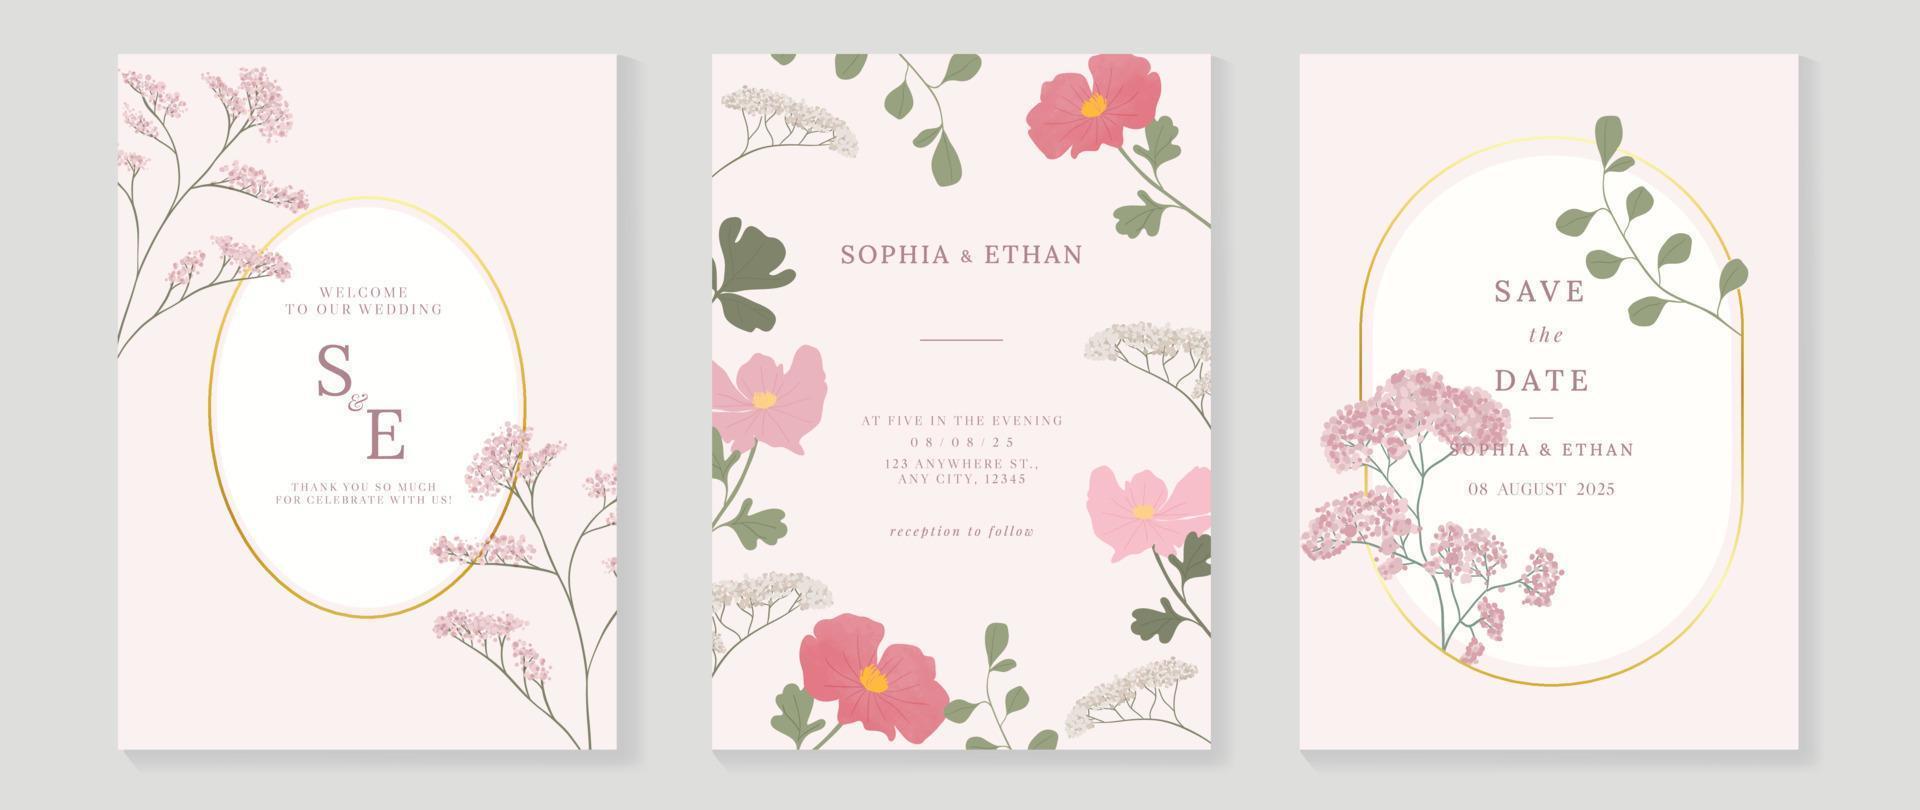 Luxury wedding invitation card background vector. Elegant watercolor botanical pink theme wildflowers and geometric gold frame texture. Design illustration for wedding and vip cover template, banner. vector